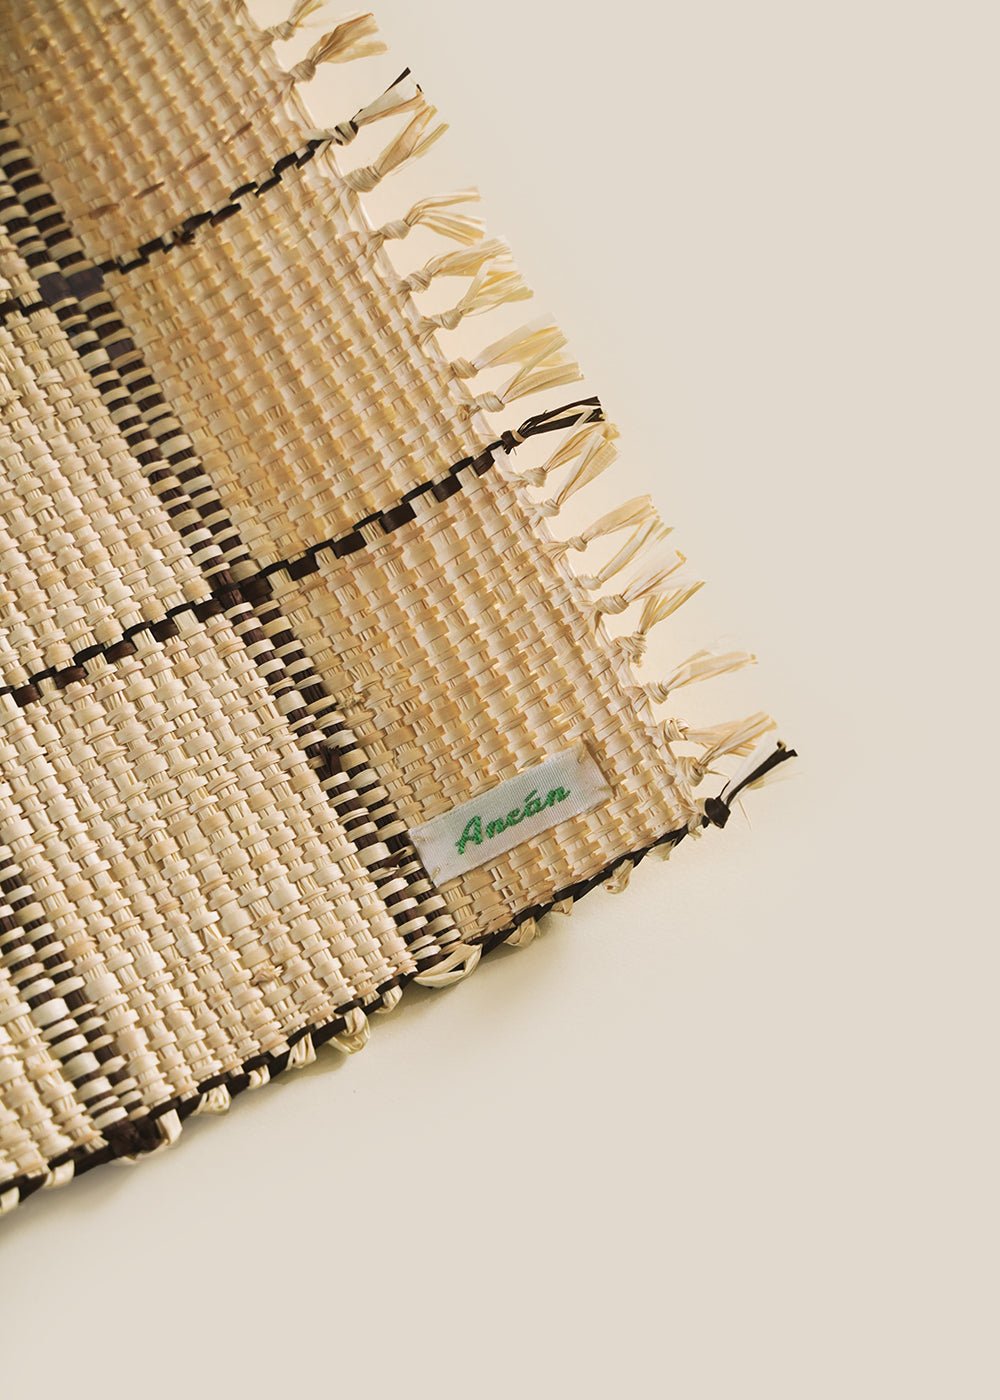 Ancán Grid Woven Placemats - New Classics Studios Sustainable Ethical Fashion Canada